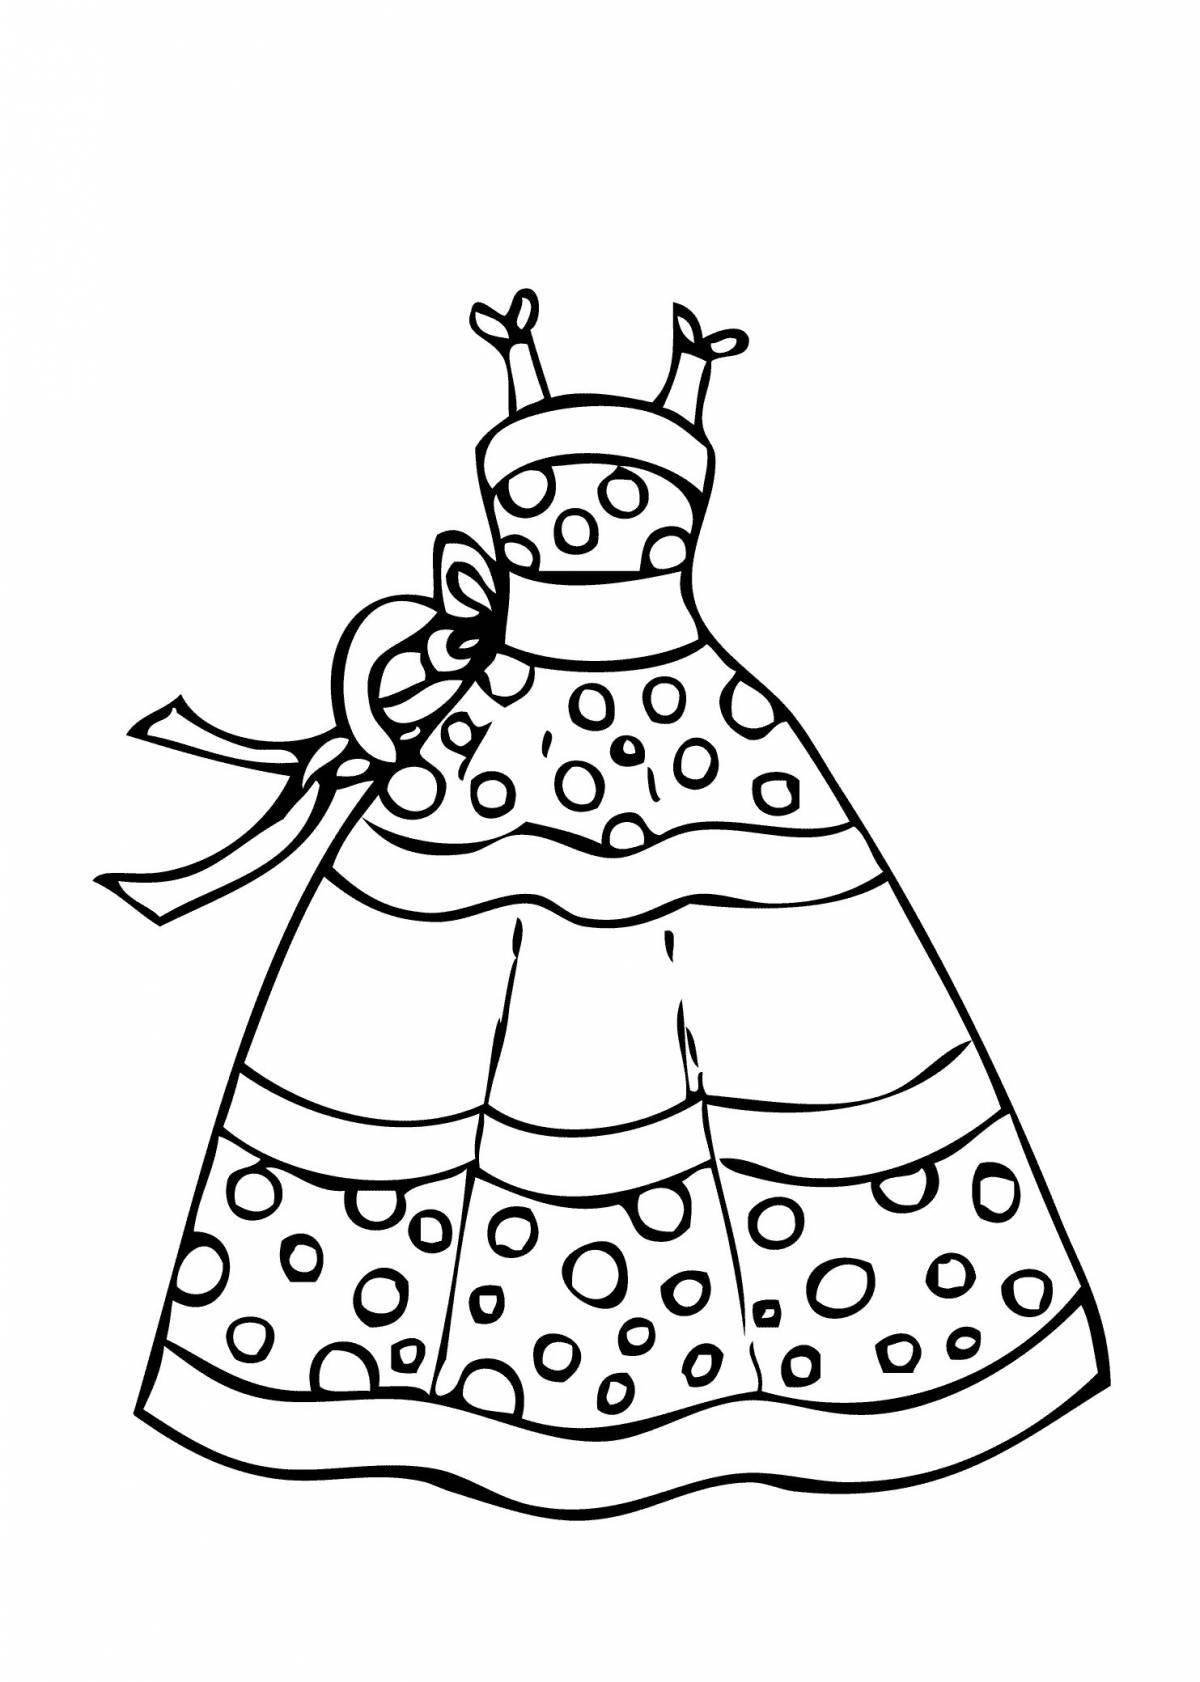 Coloring page gentle dress for children 5-6 years old